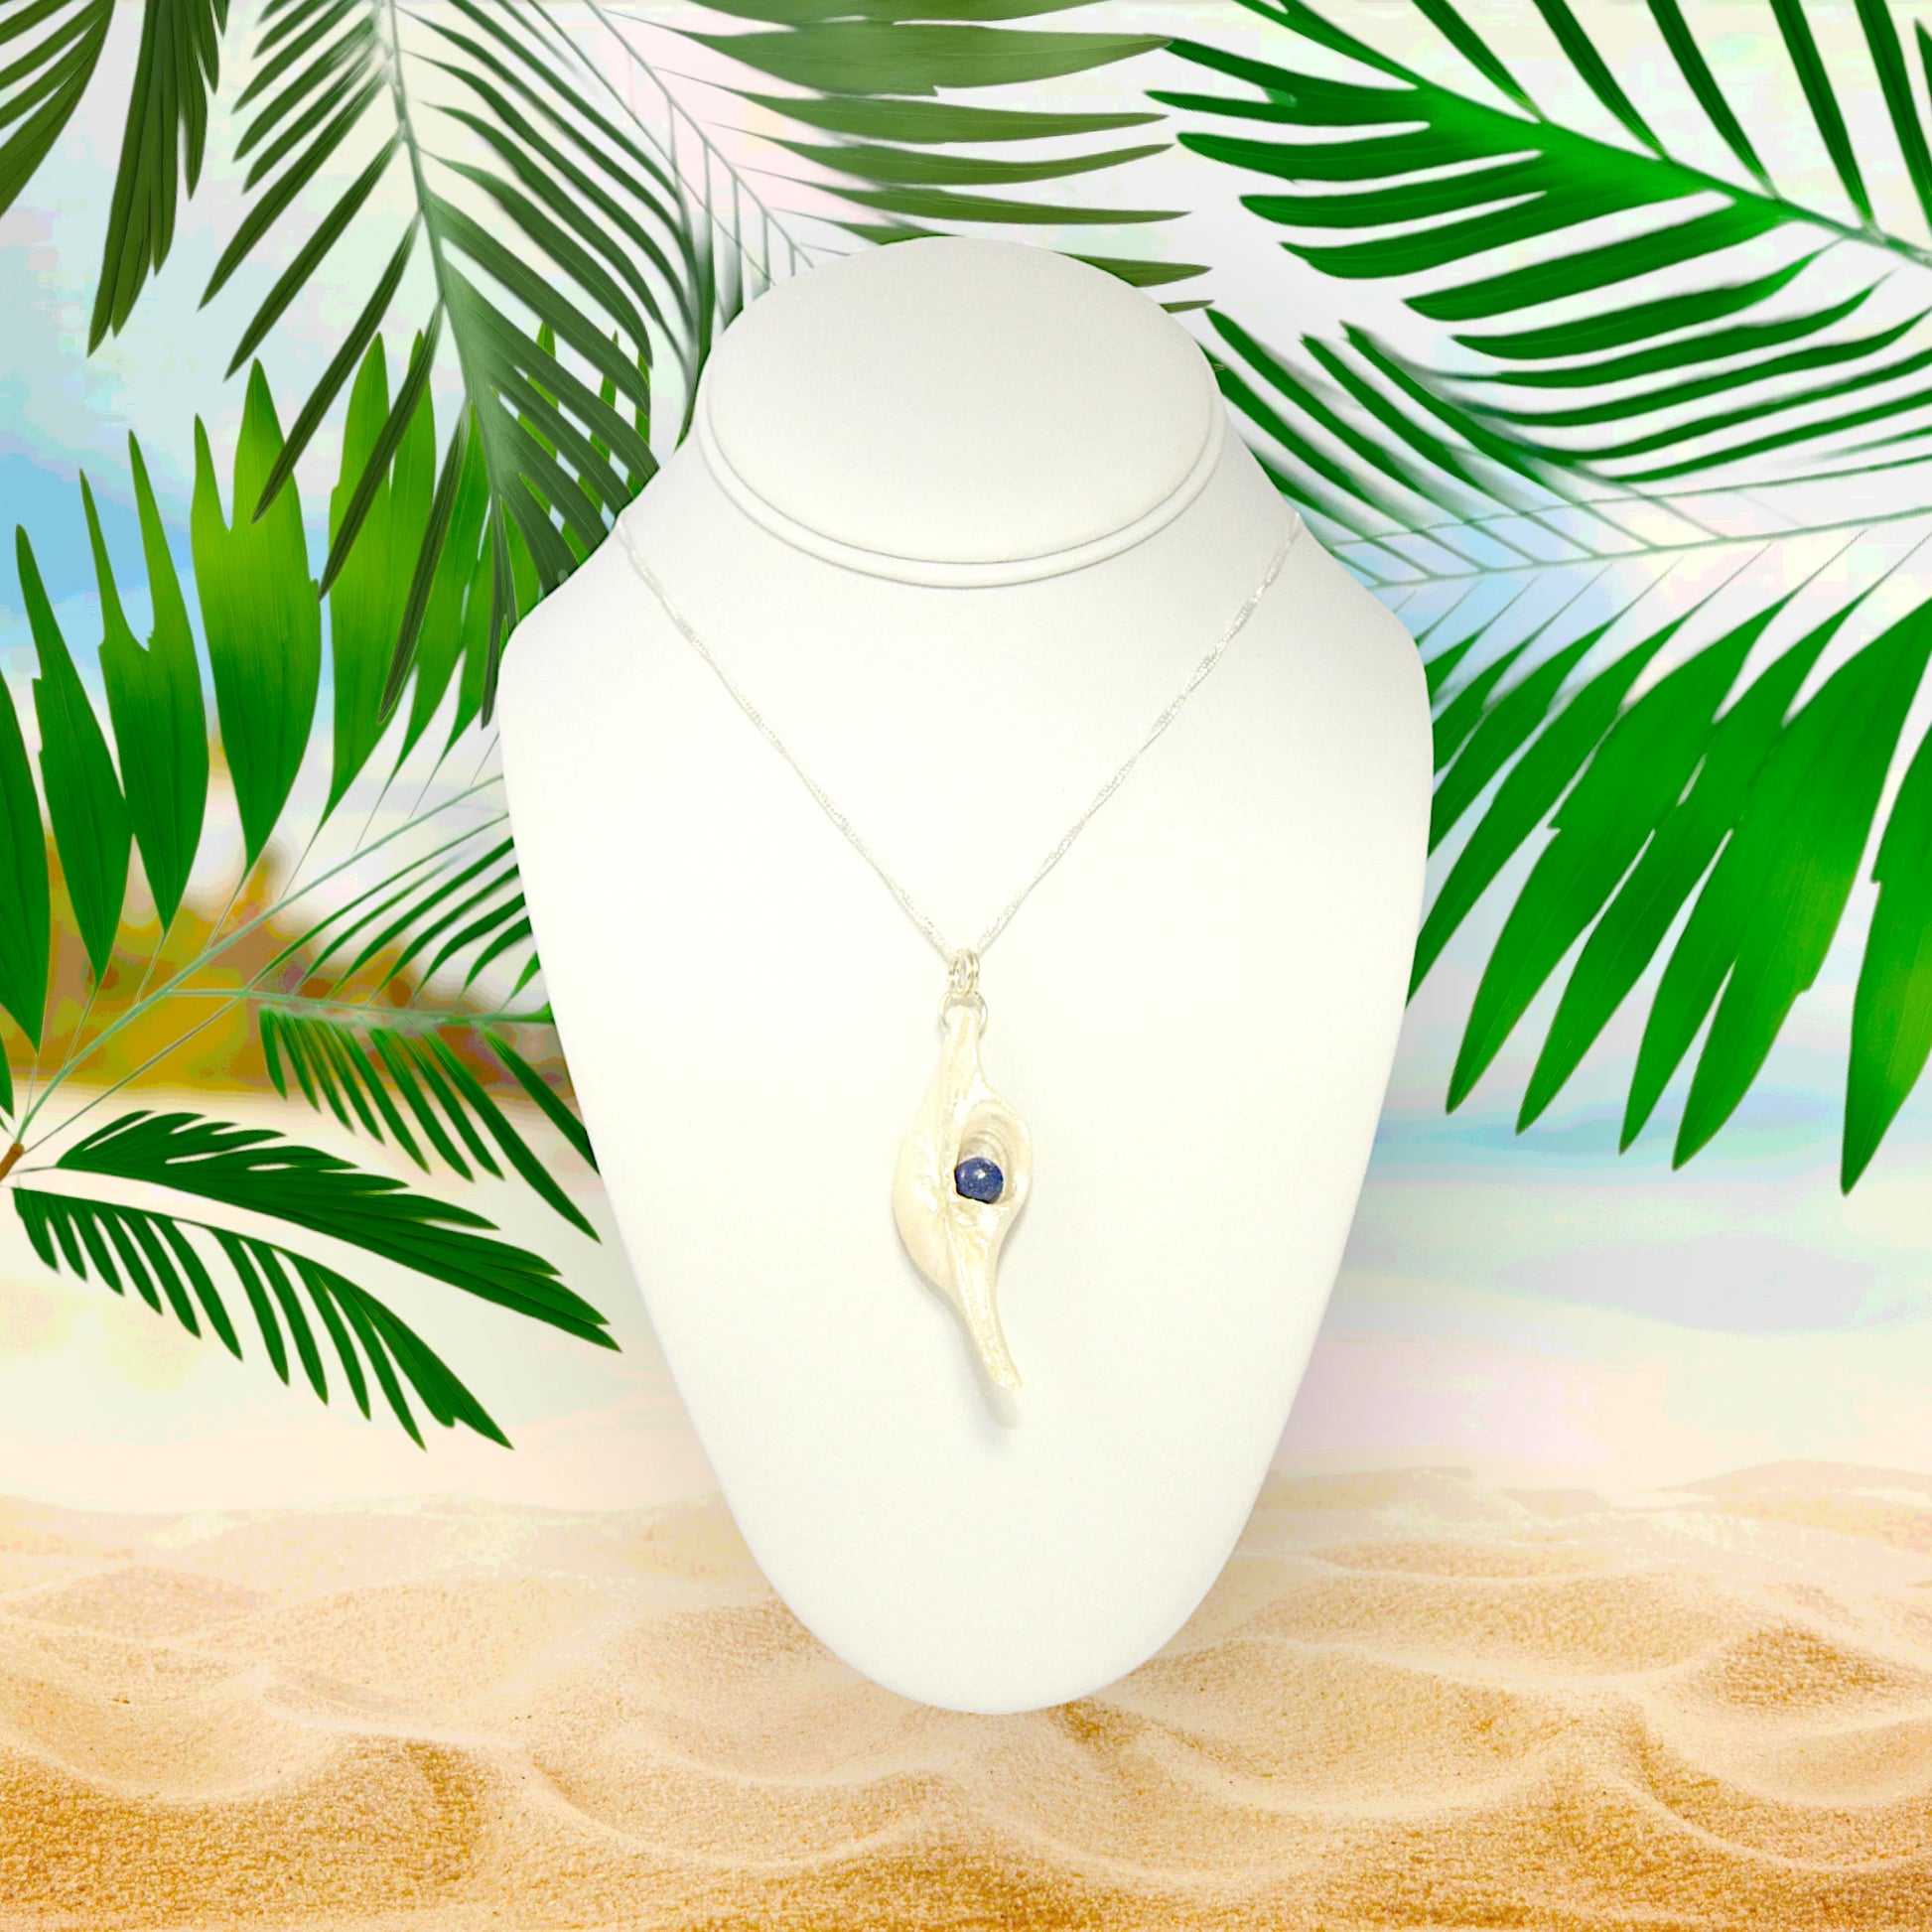 Vision is a natural seashell pendant with a Lapis Lazuli gemstone.  The pendant is shown on a white necklace displayer on a sandy beach surrounded by greenery.